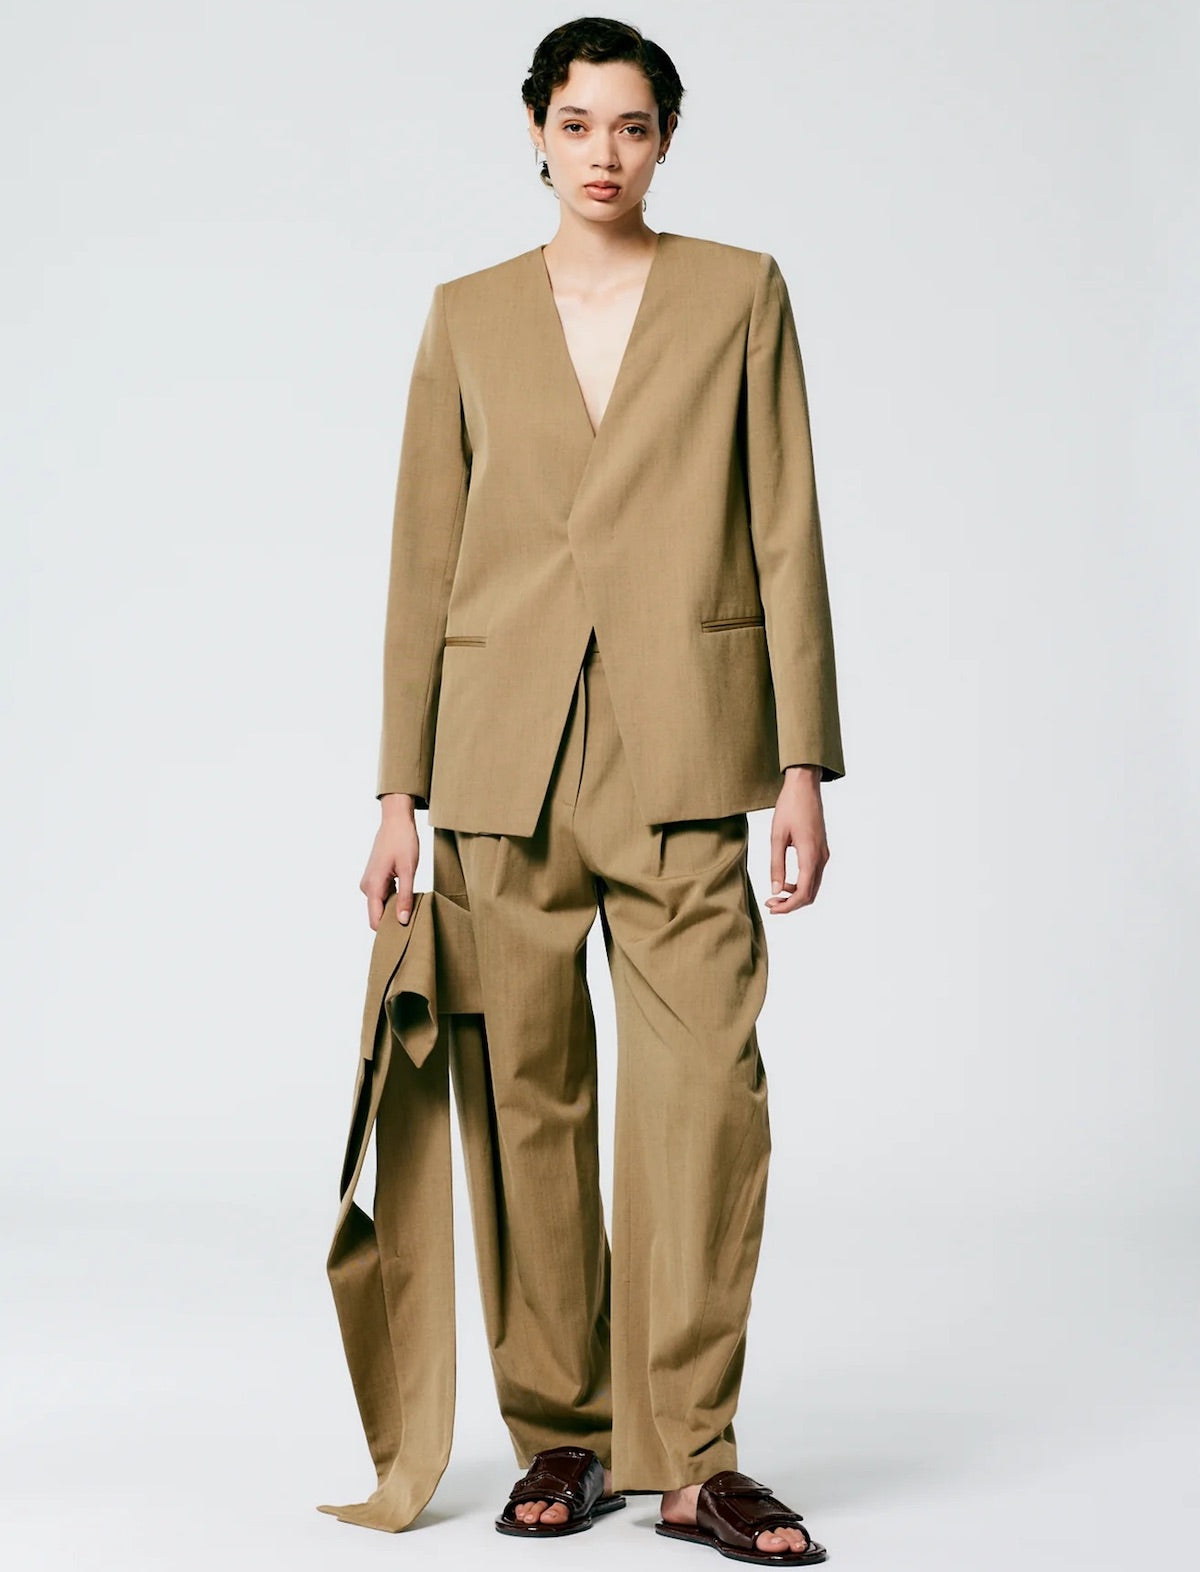 TIBI Refined Wool Tricotine Suiting Blazer in Tan